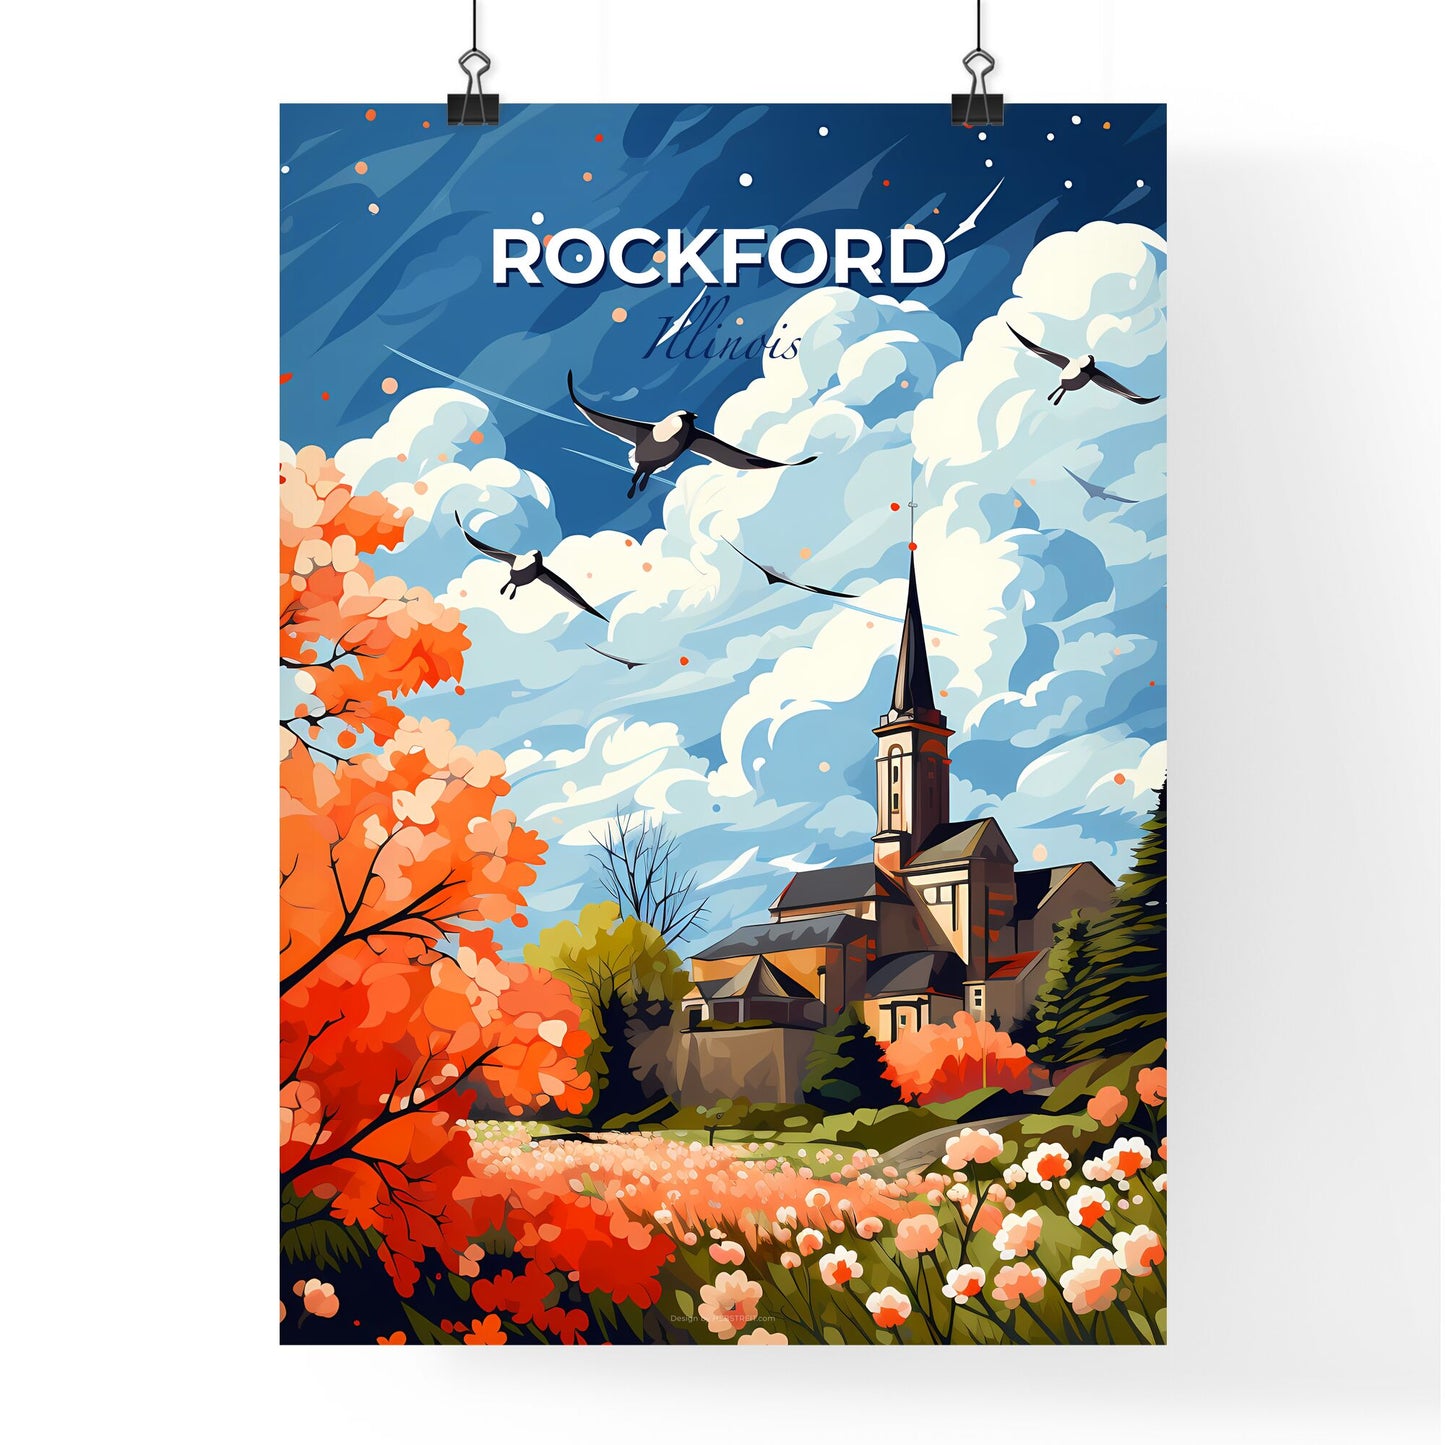 Rockford, Illinois, A Poster of birds flying over a church Default Title